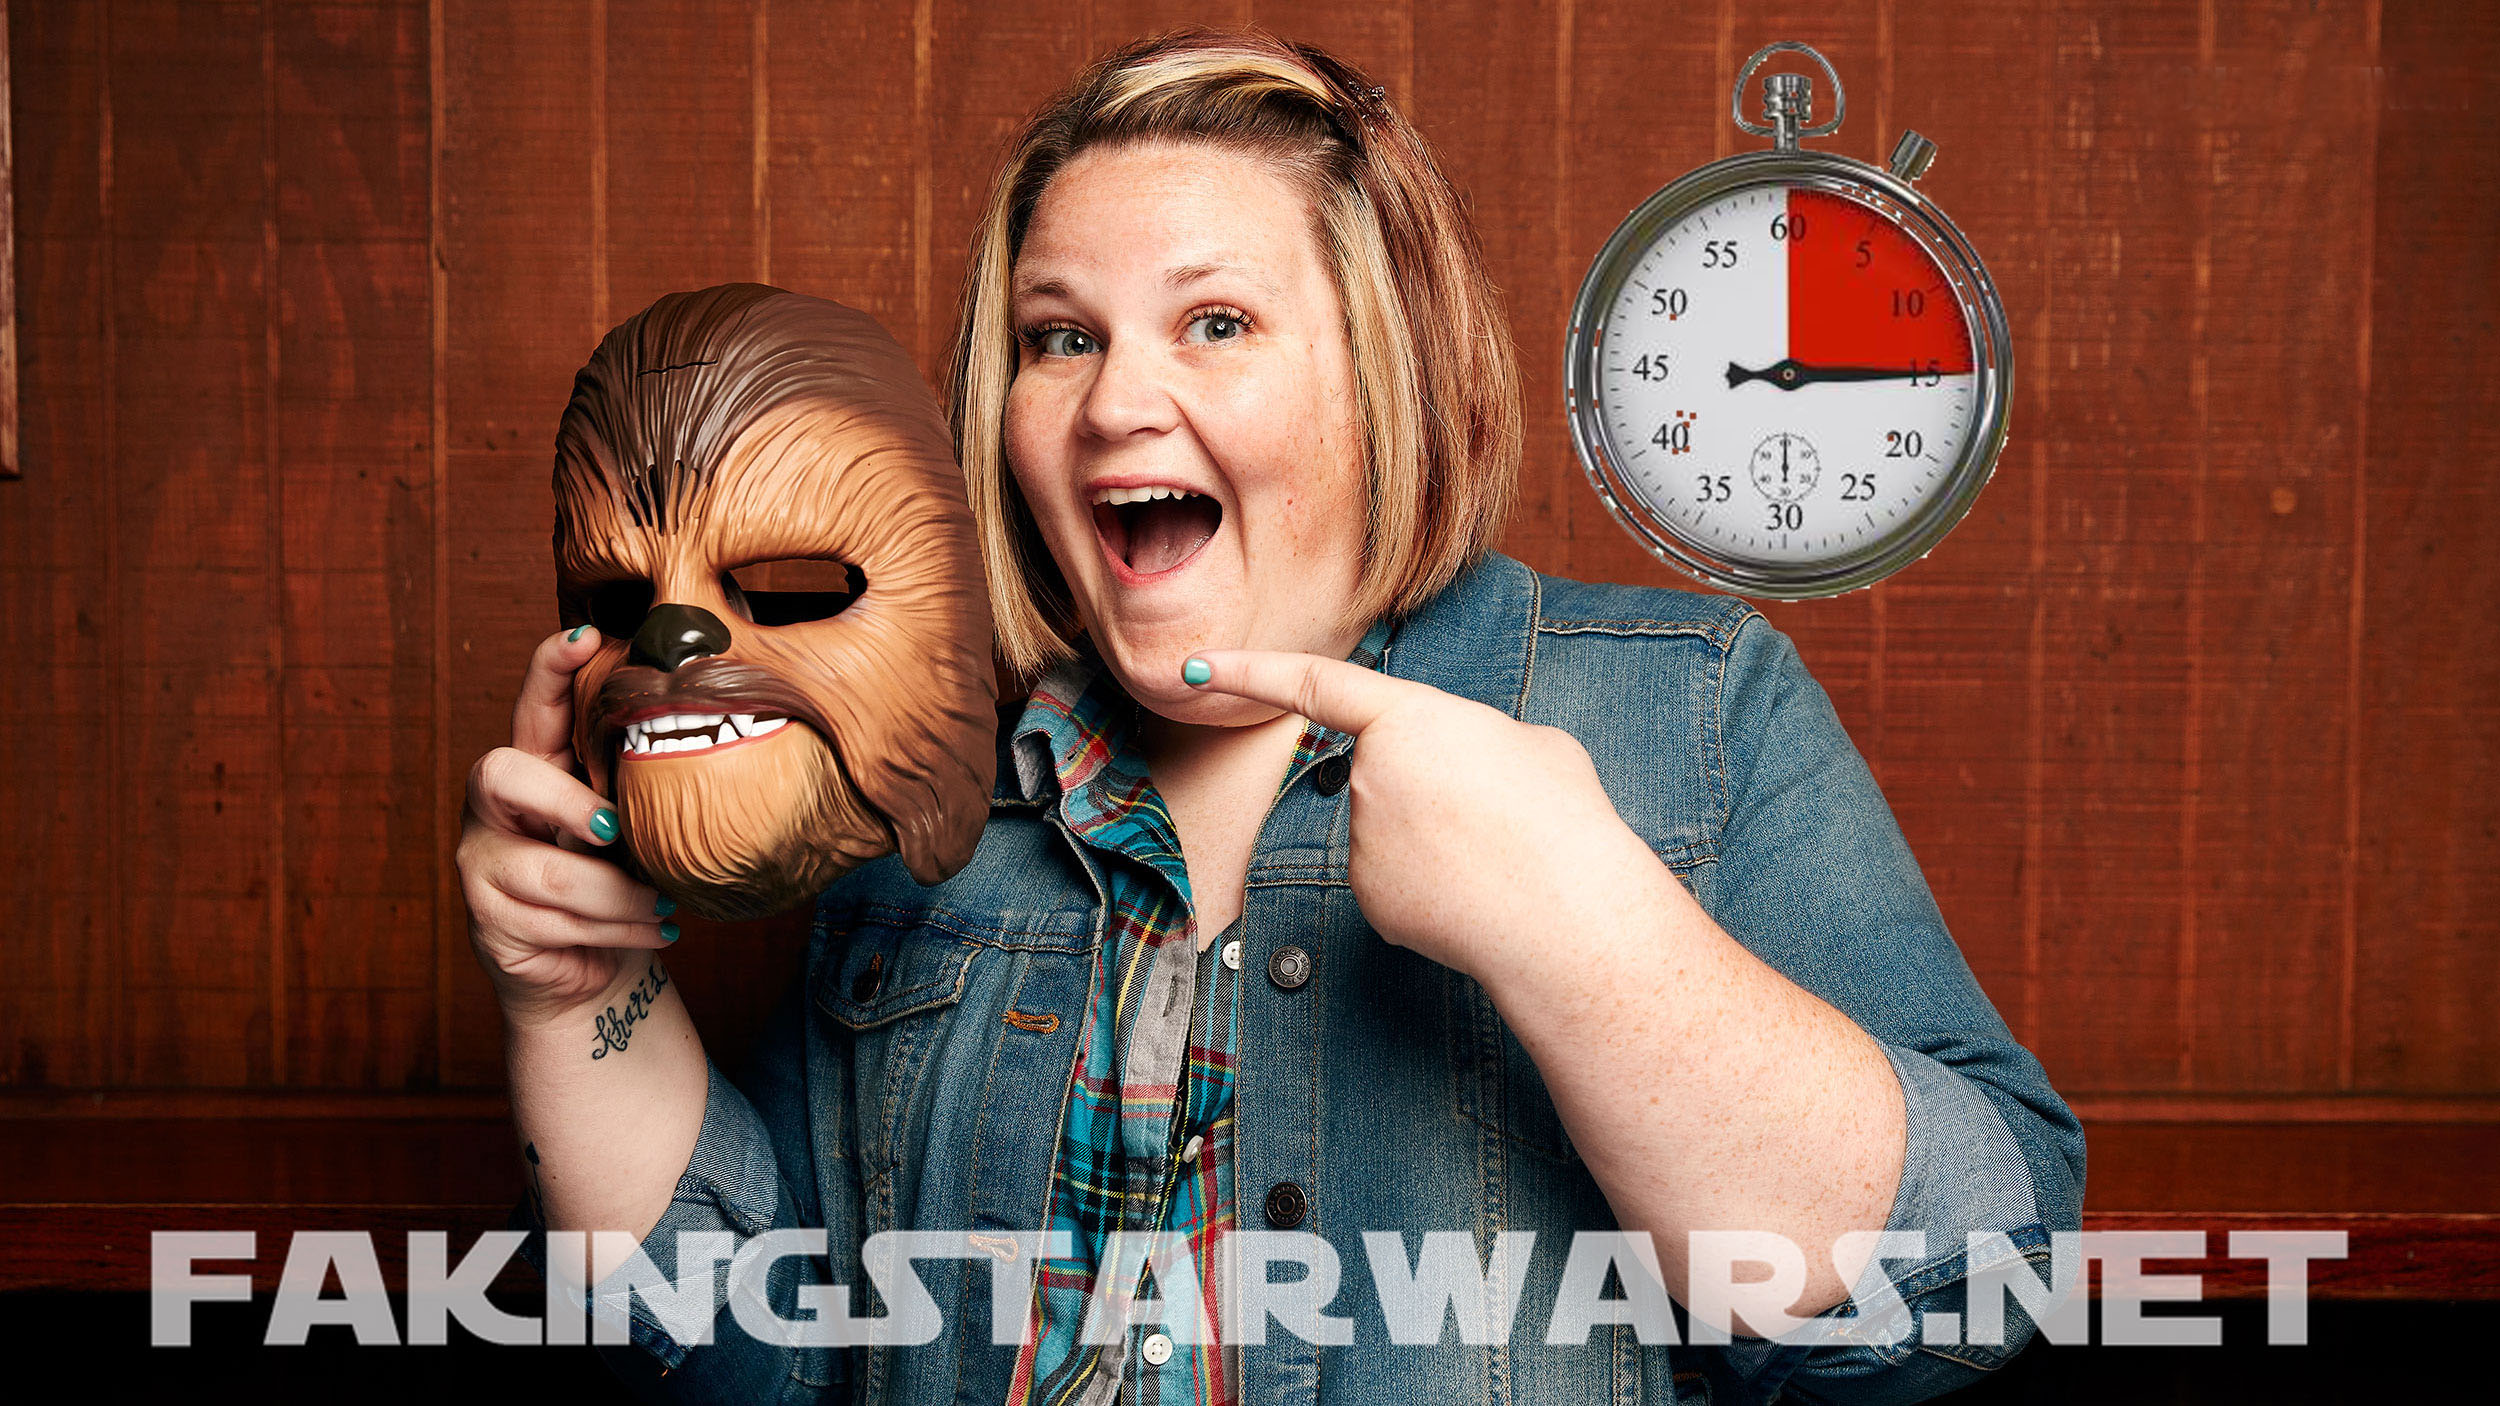 Chewbacca Mom Receives 15 More Minutes of Fame for Mother’s Day